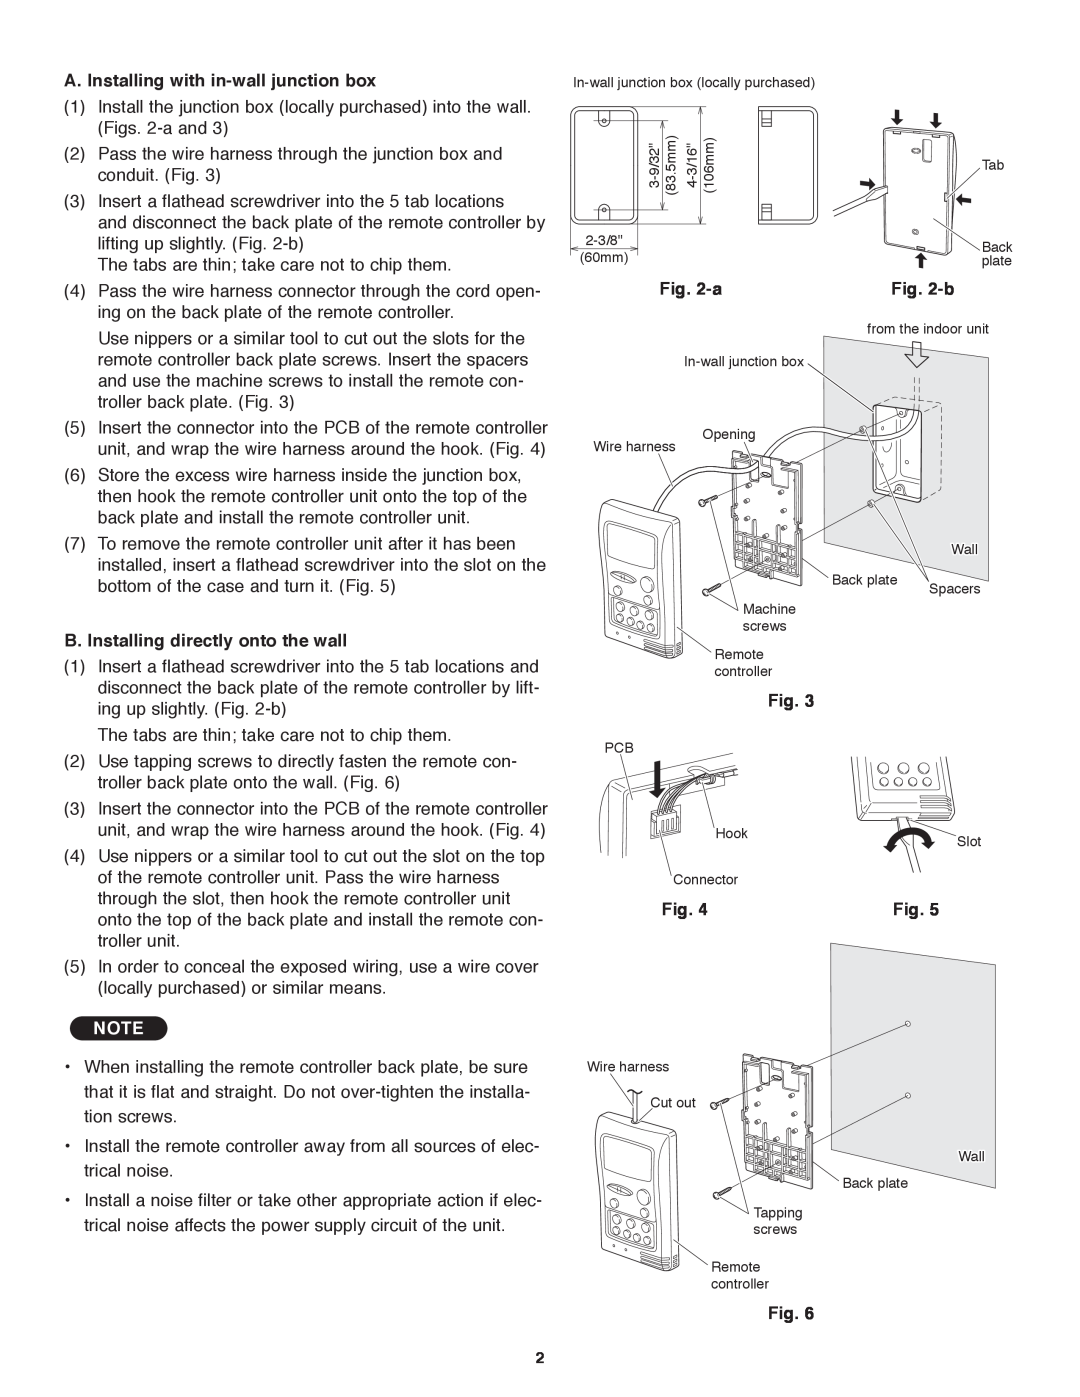 Panasonic CZ-RD515U service manual A. Installing with in-walljunction box, B. Installing directly onto the wall 